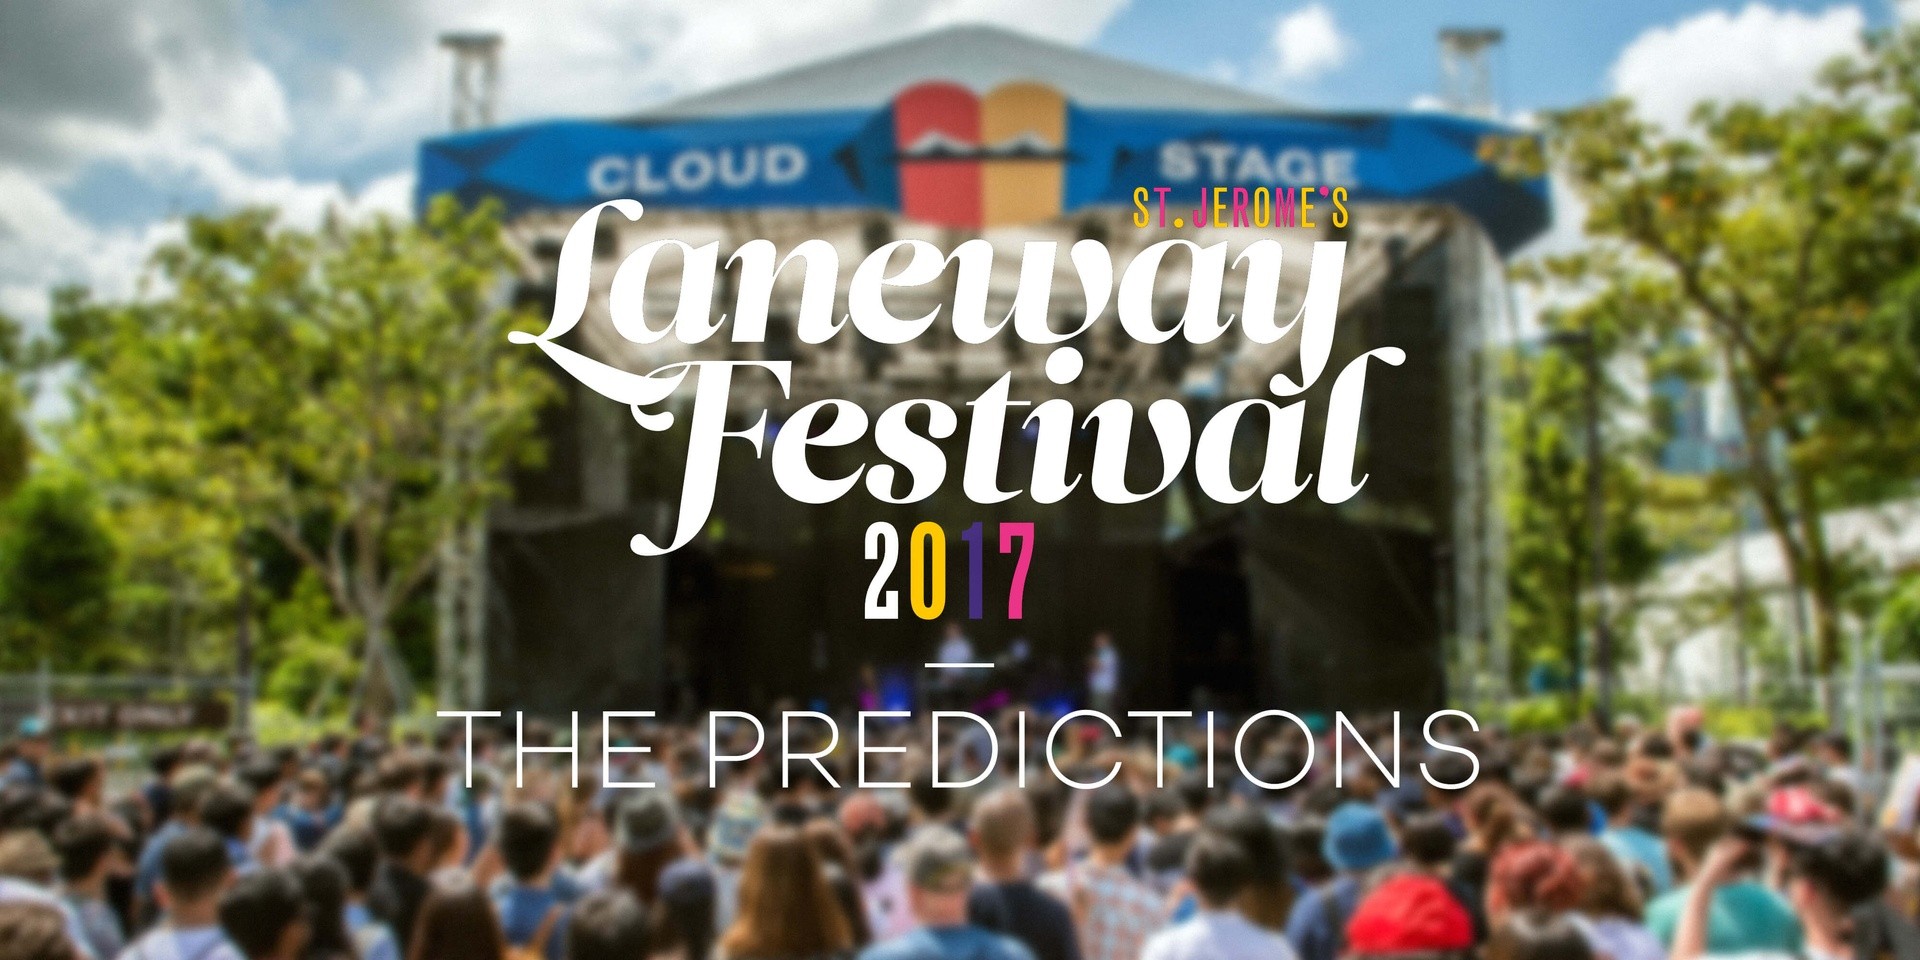 Laneway Festival SG 2017 Special: The Predictions